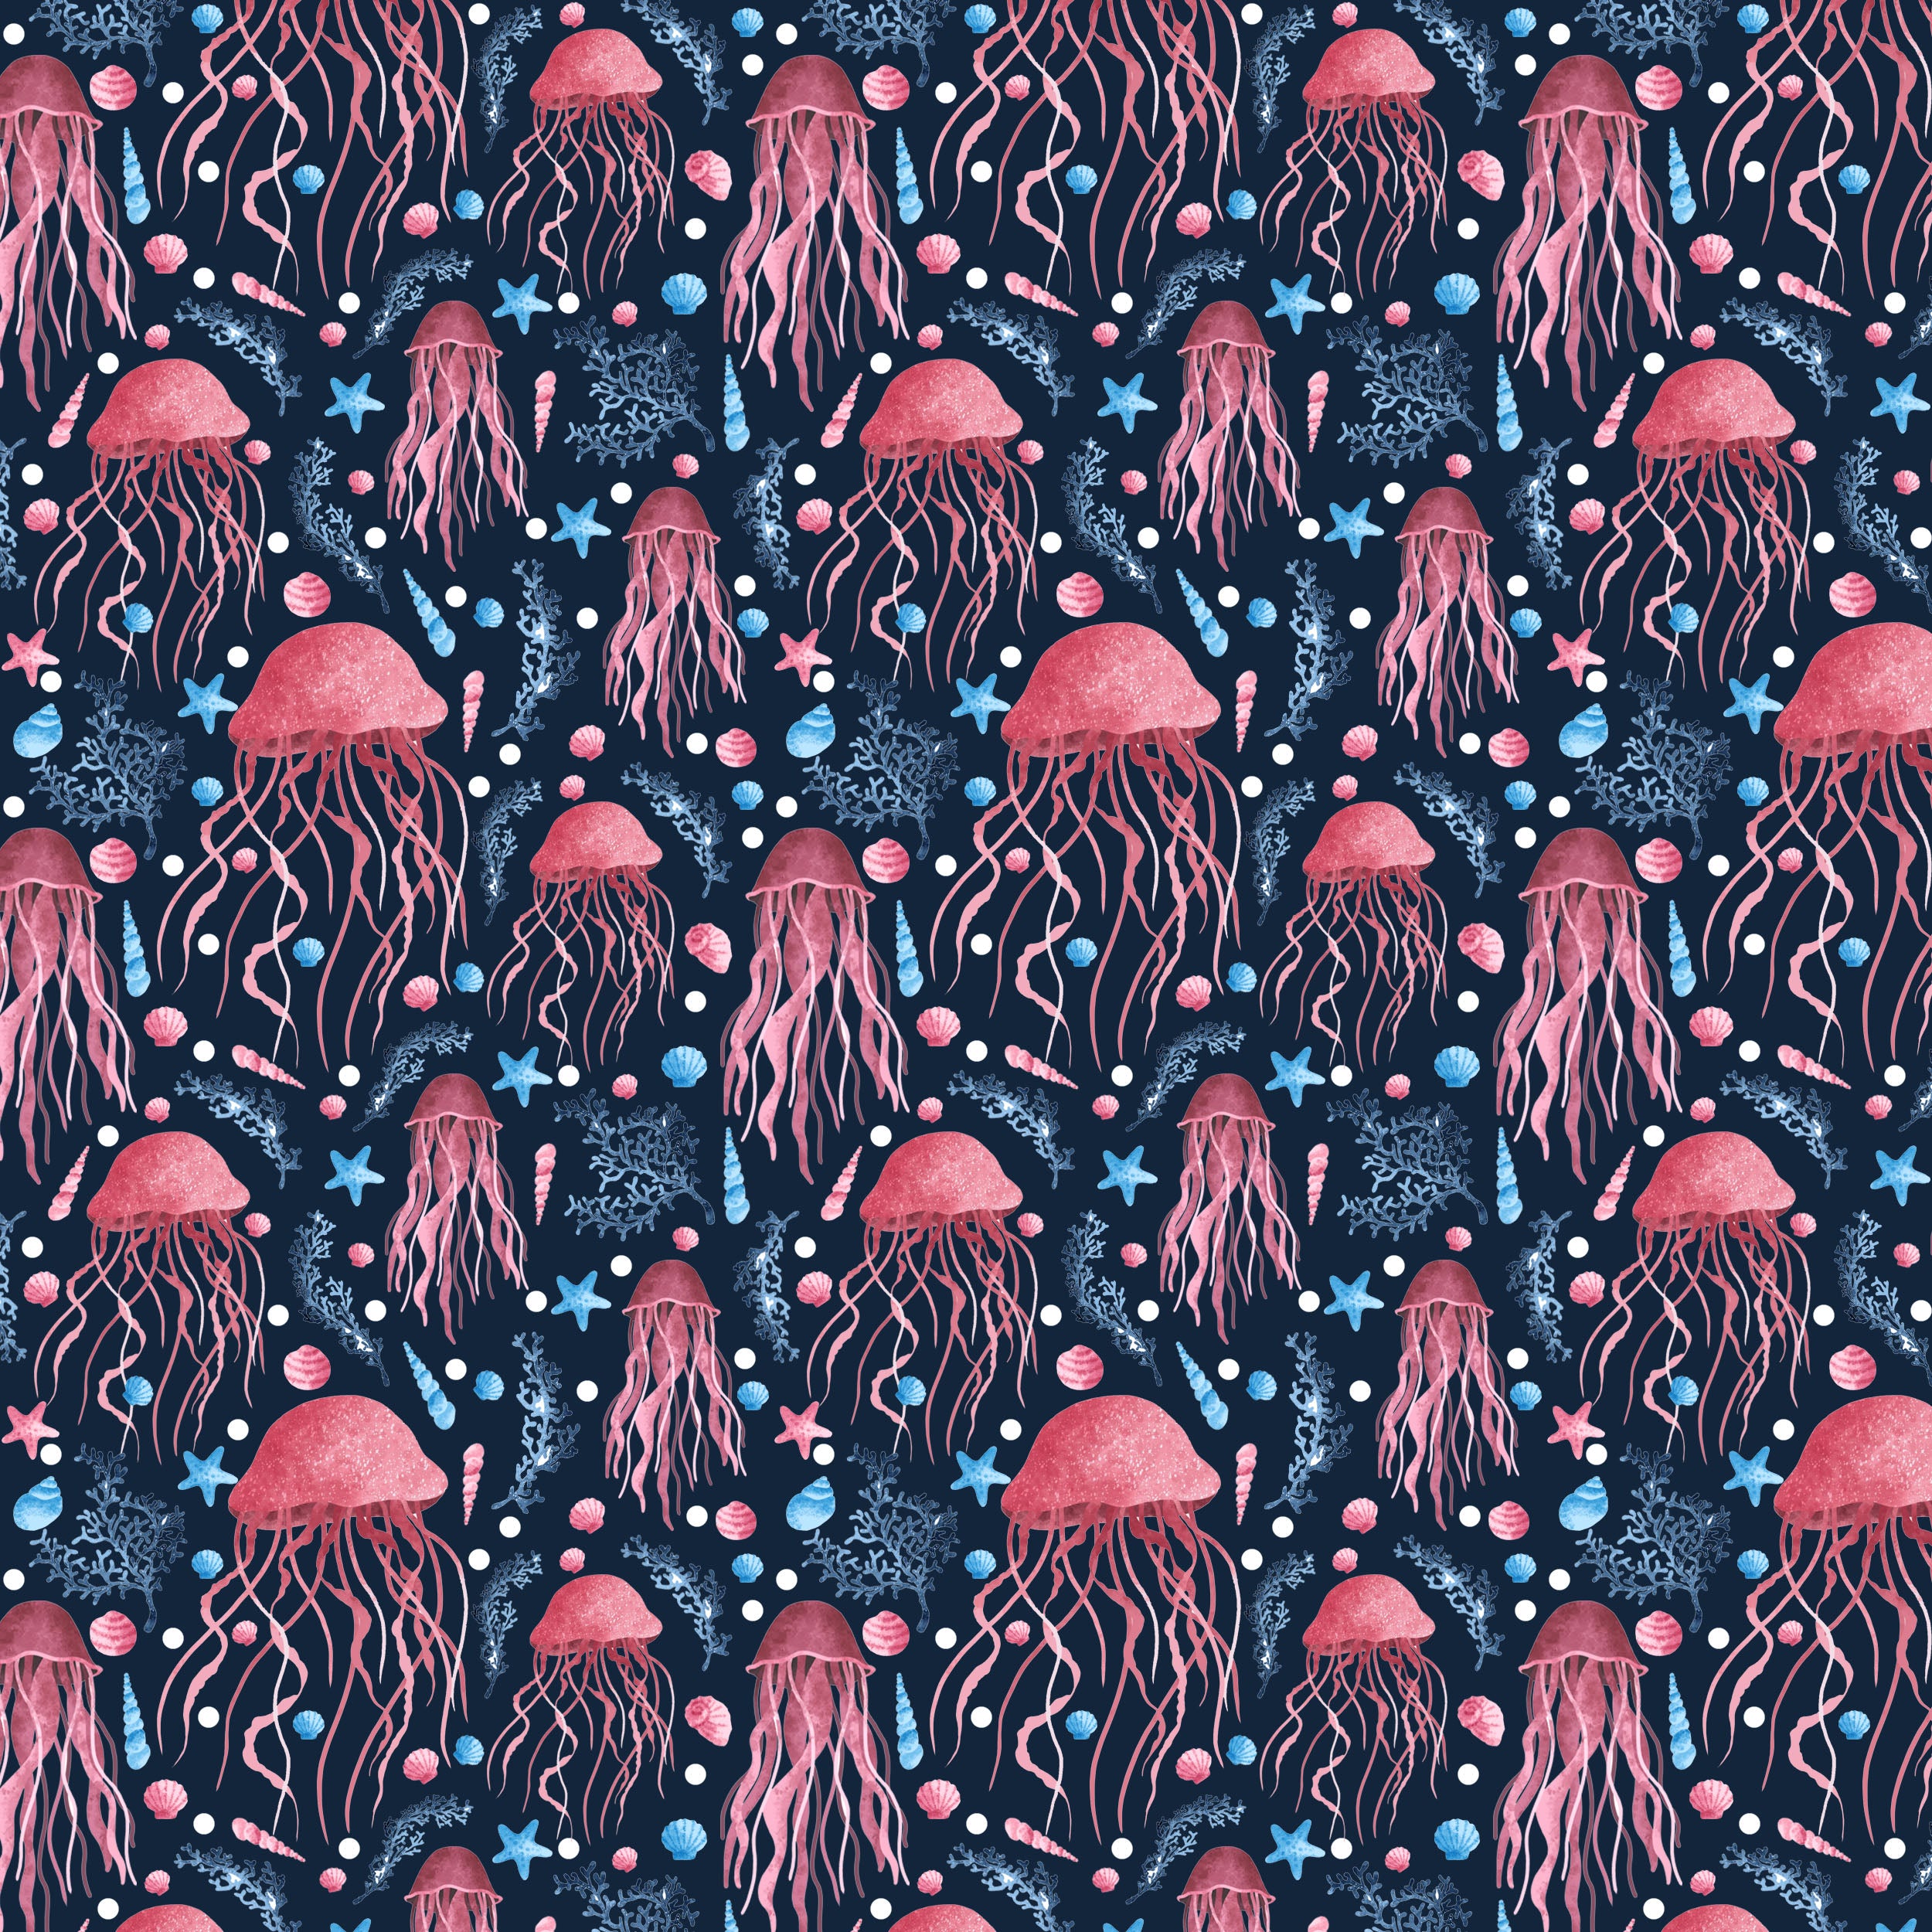 jellyfish repeat design designed by Tahlia Paige